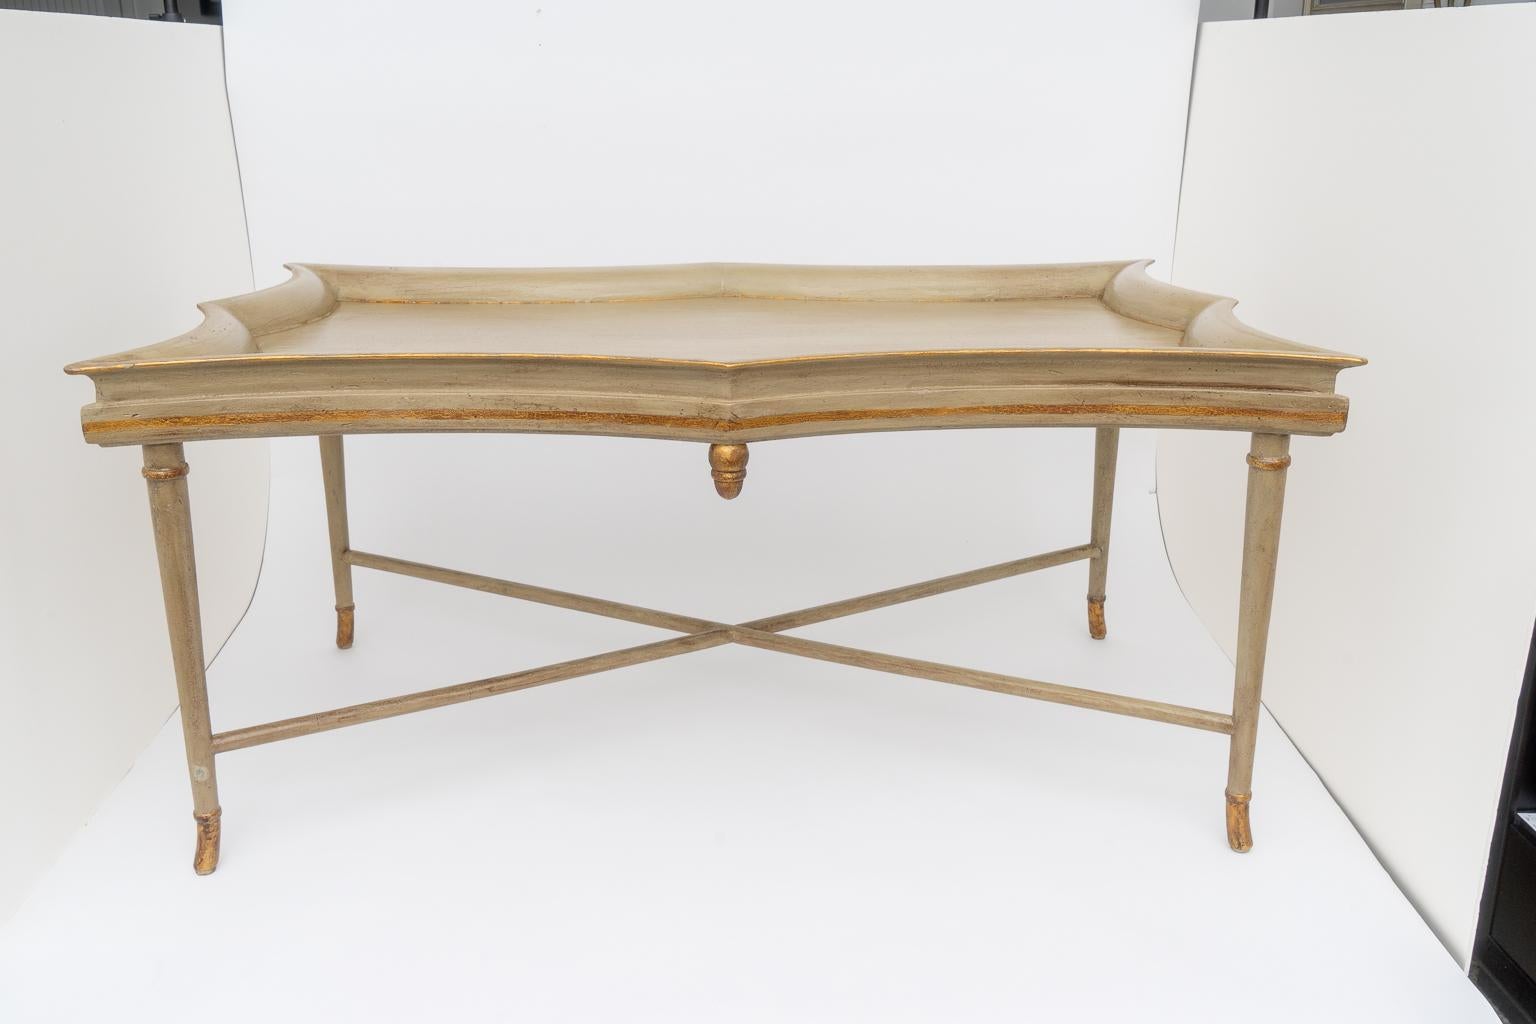 This stylish tray-table form cocktail table was acquired from a Palm Beach estate. The piece has a crackle finish, in a putty coloration with antique gold accents.